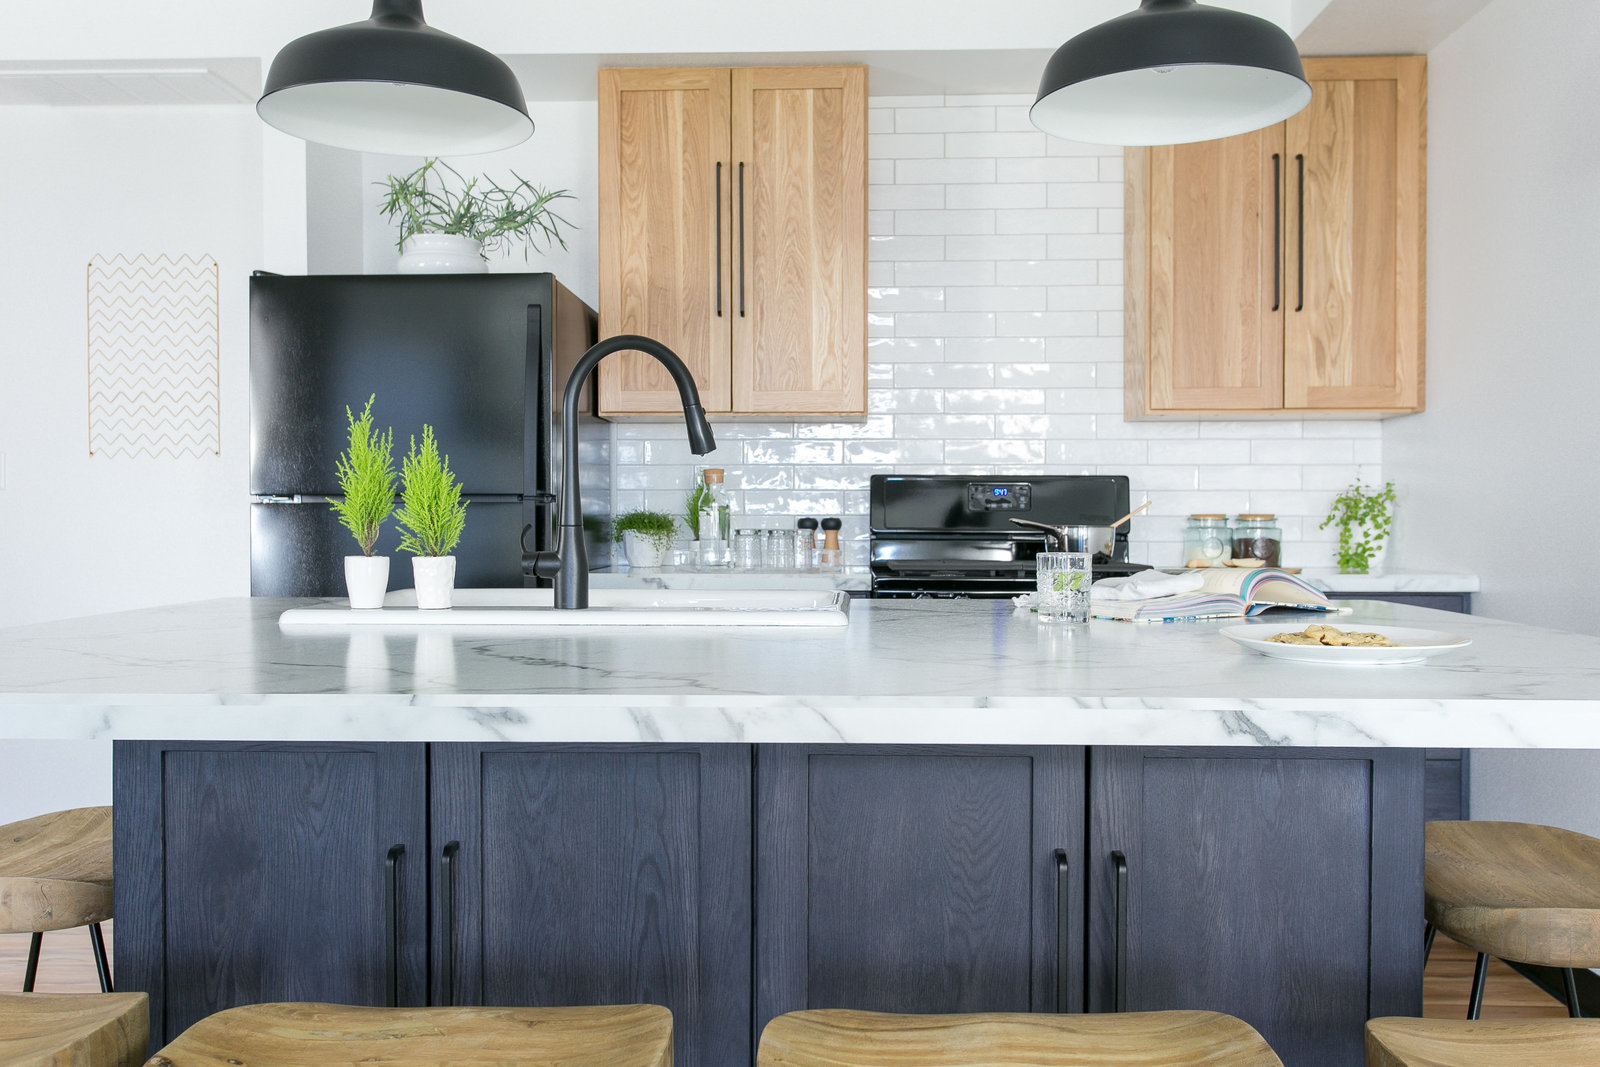 Modern BnB kitchen design with natural oak upper cabinets, navy stained lower cabinets and island base. Minimalist black pendents  with marble like laminate countertops.